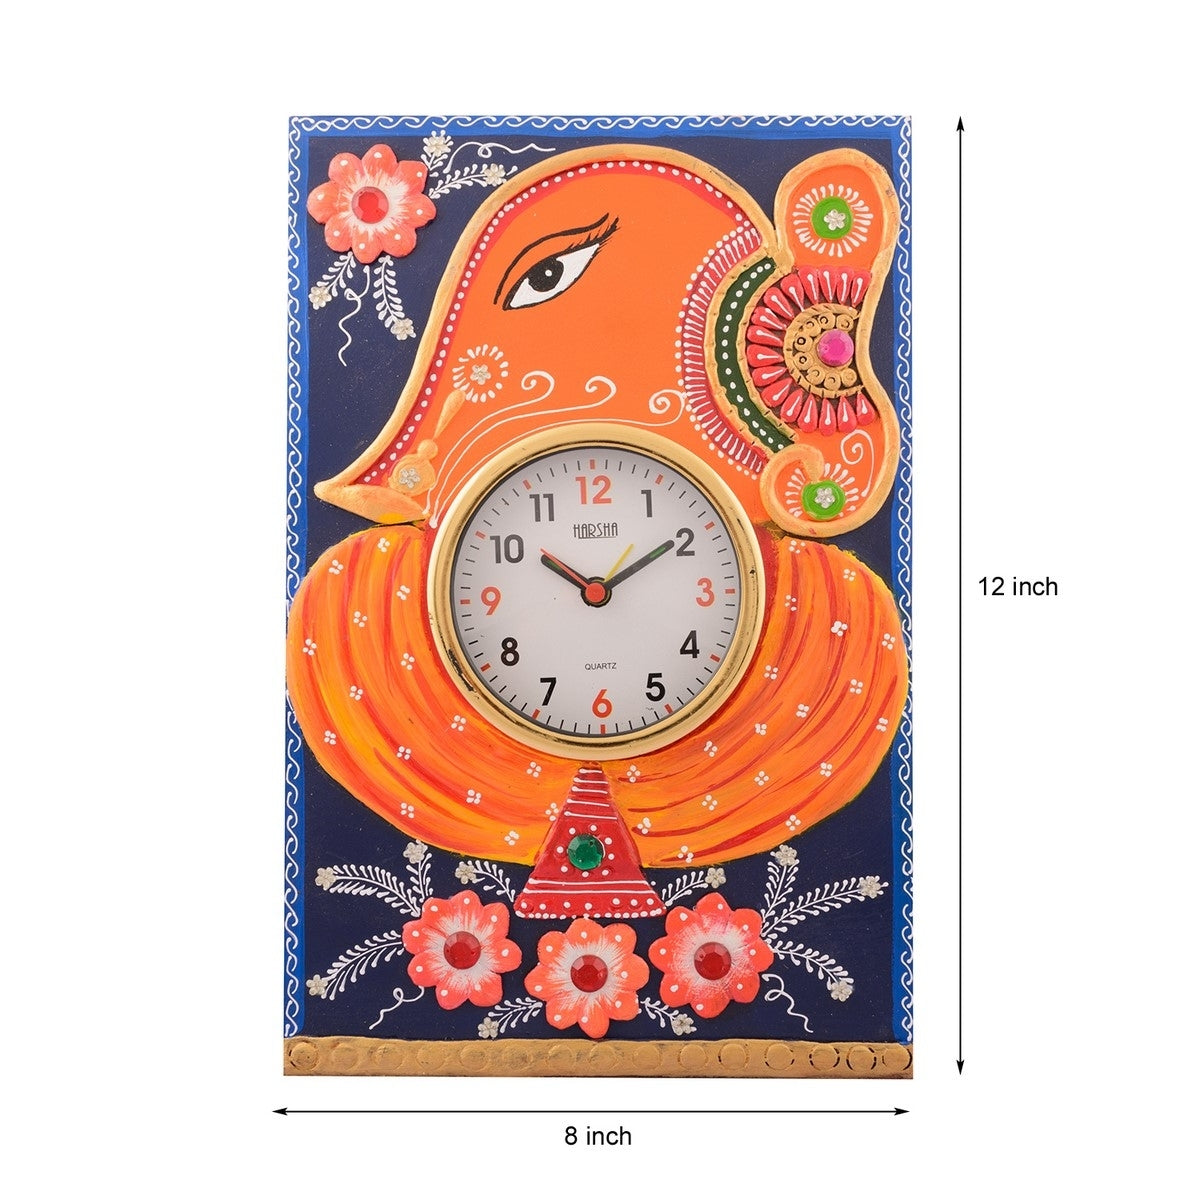 Wooden Papier Mache Lord Ganesha Artistic Handcrafted Wall Clock 2